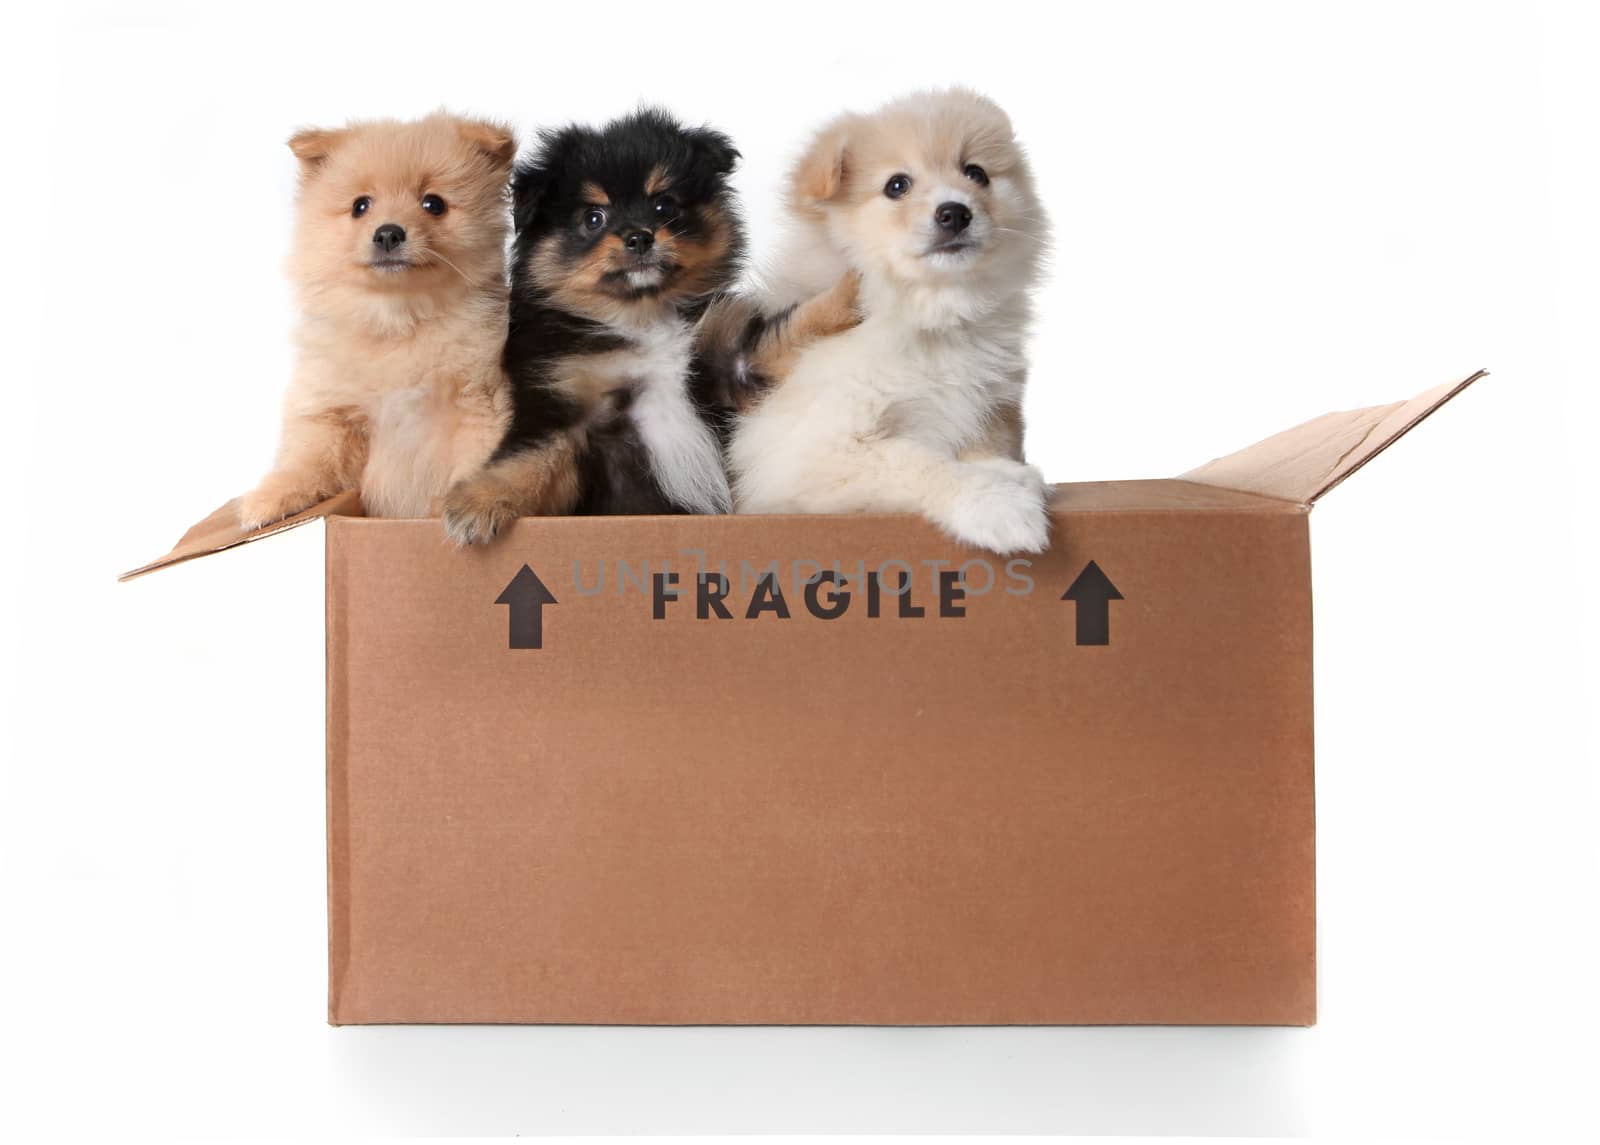 Image of 3 Pomeranian Puppies in a Cardboard Box by tobkatrina